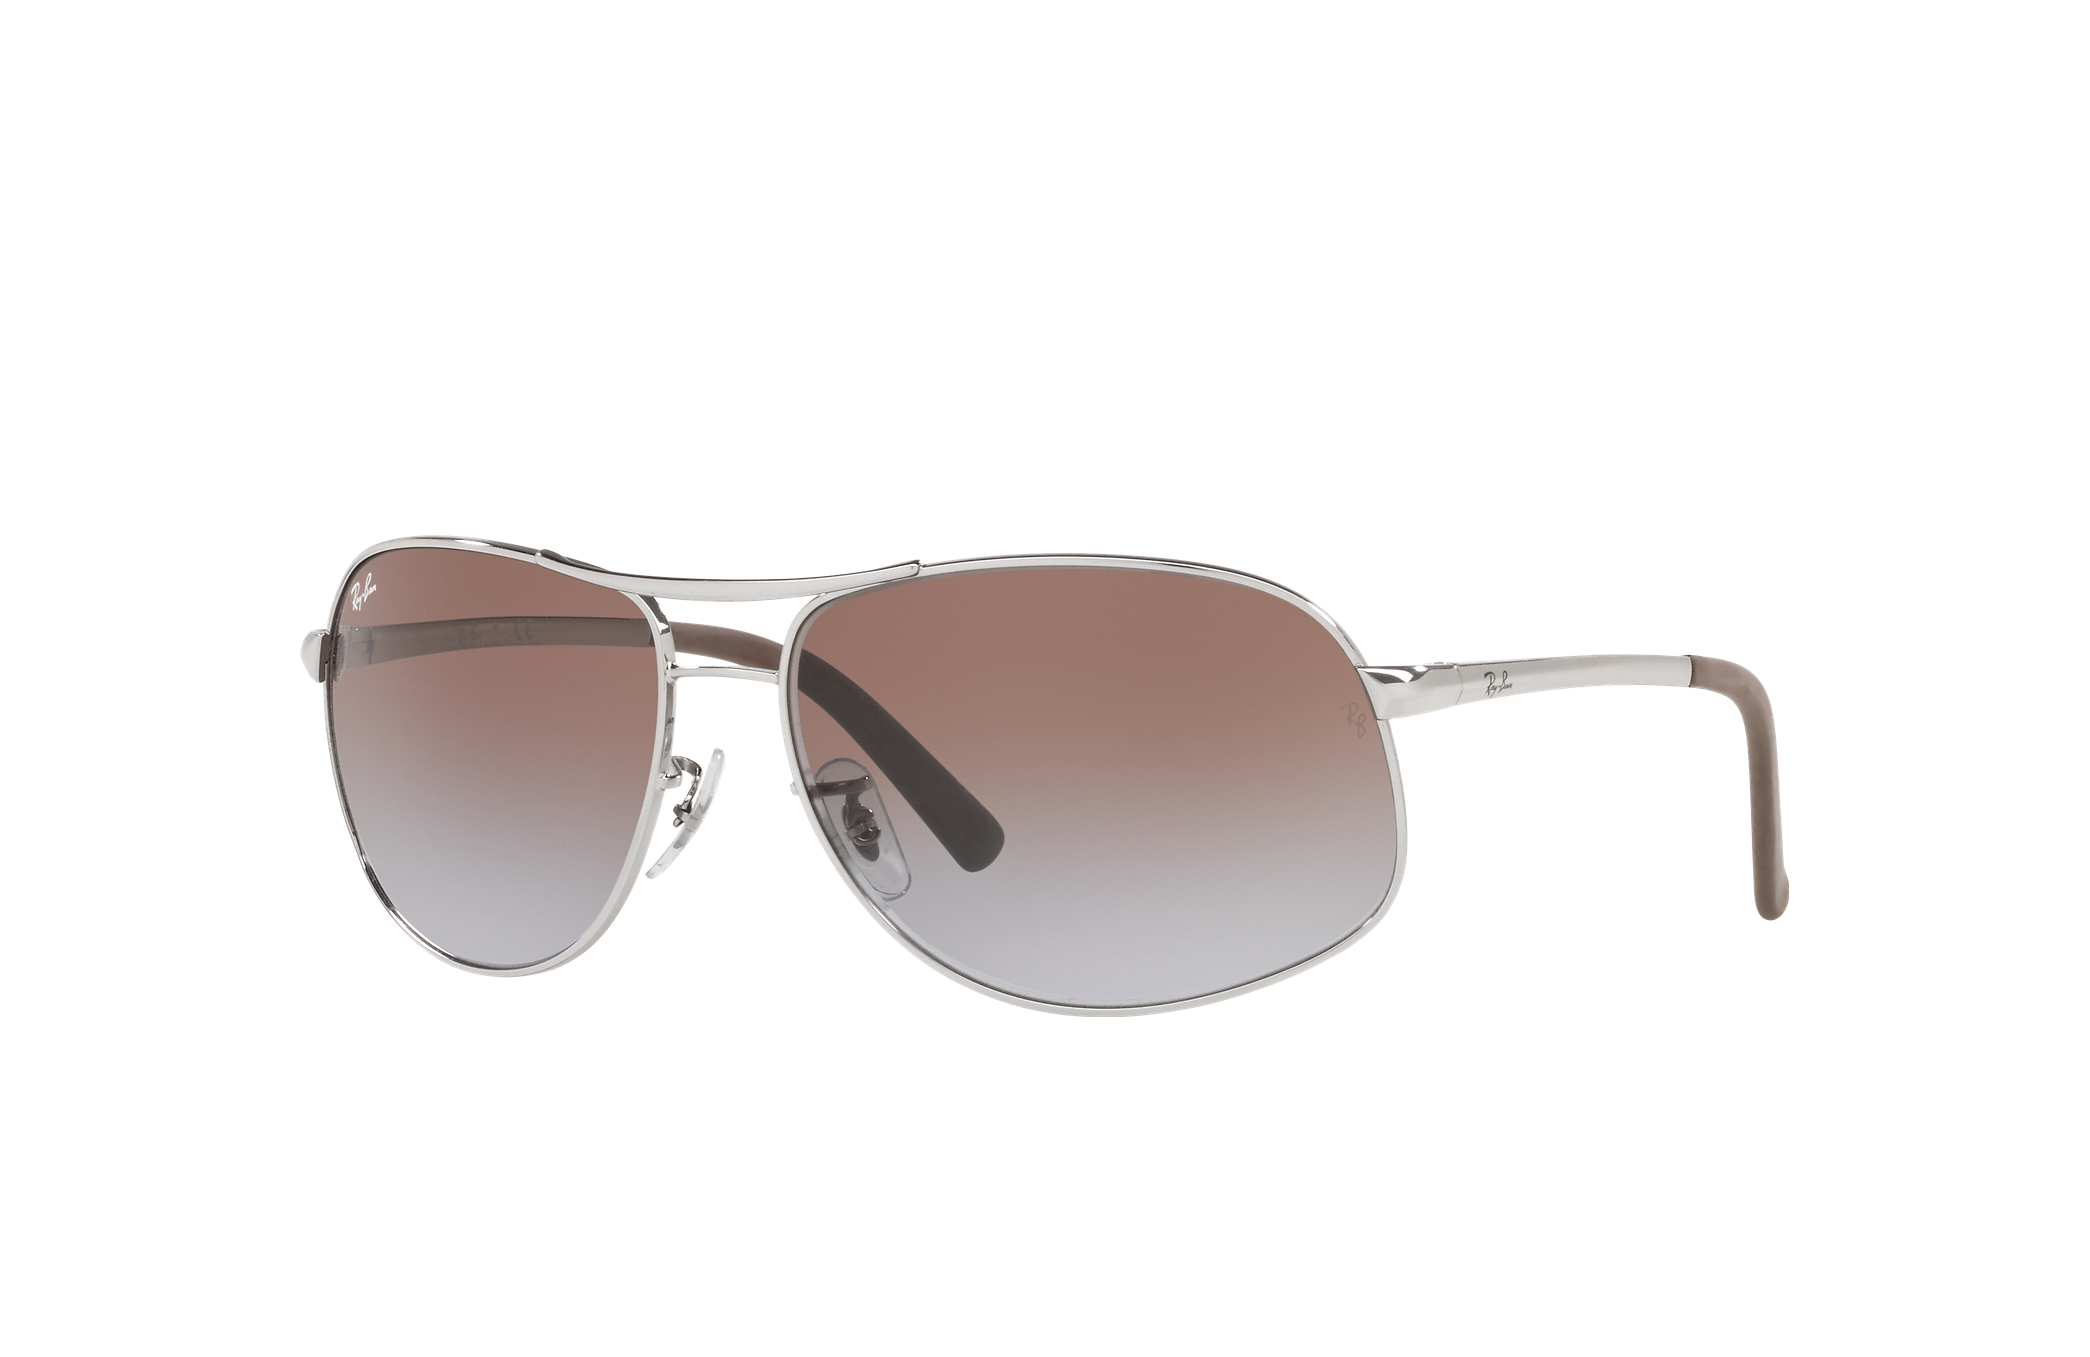 Rb3387 Sunglasses in Silver and Brown/Violet | Ray-Ban®